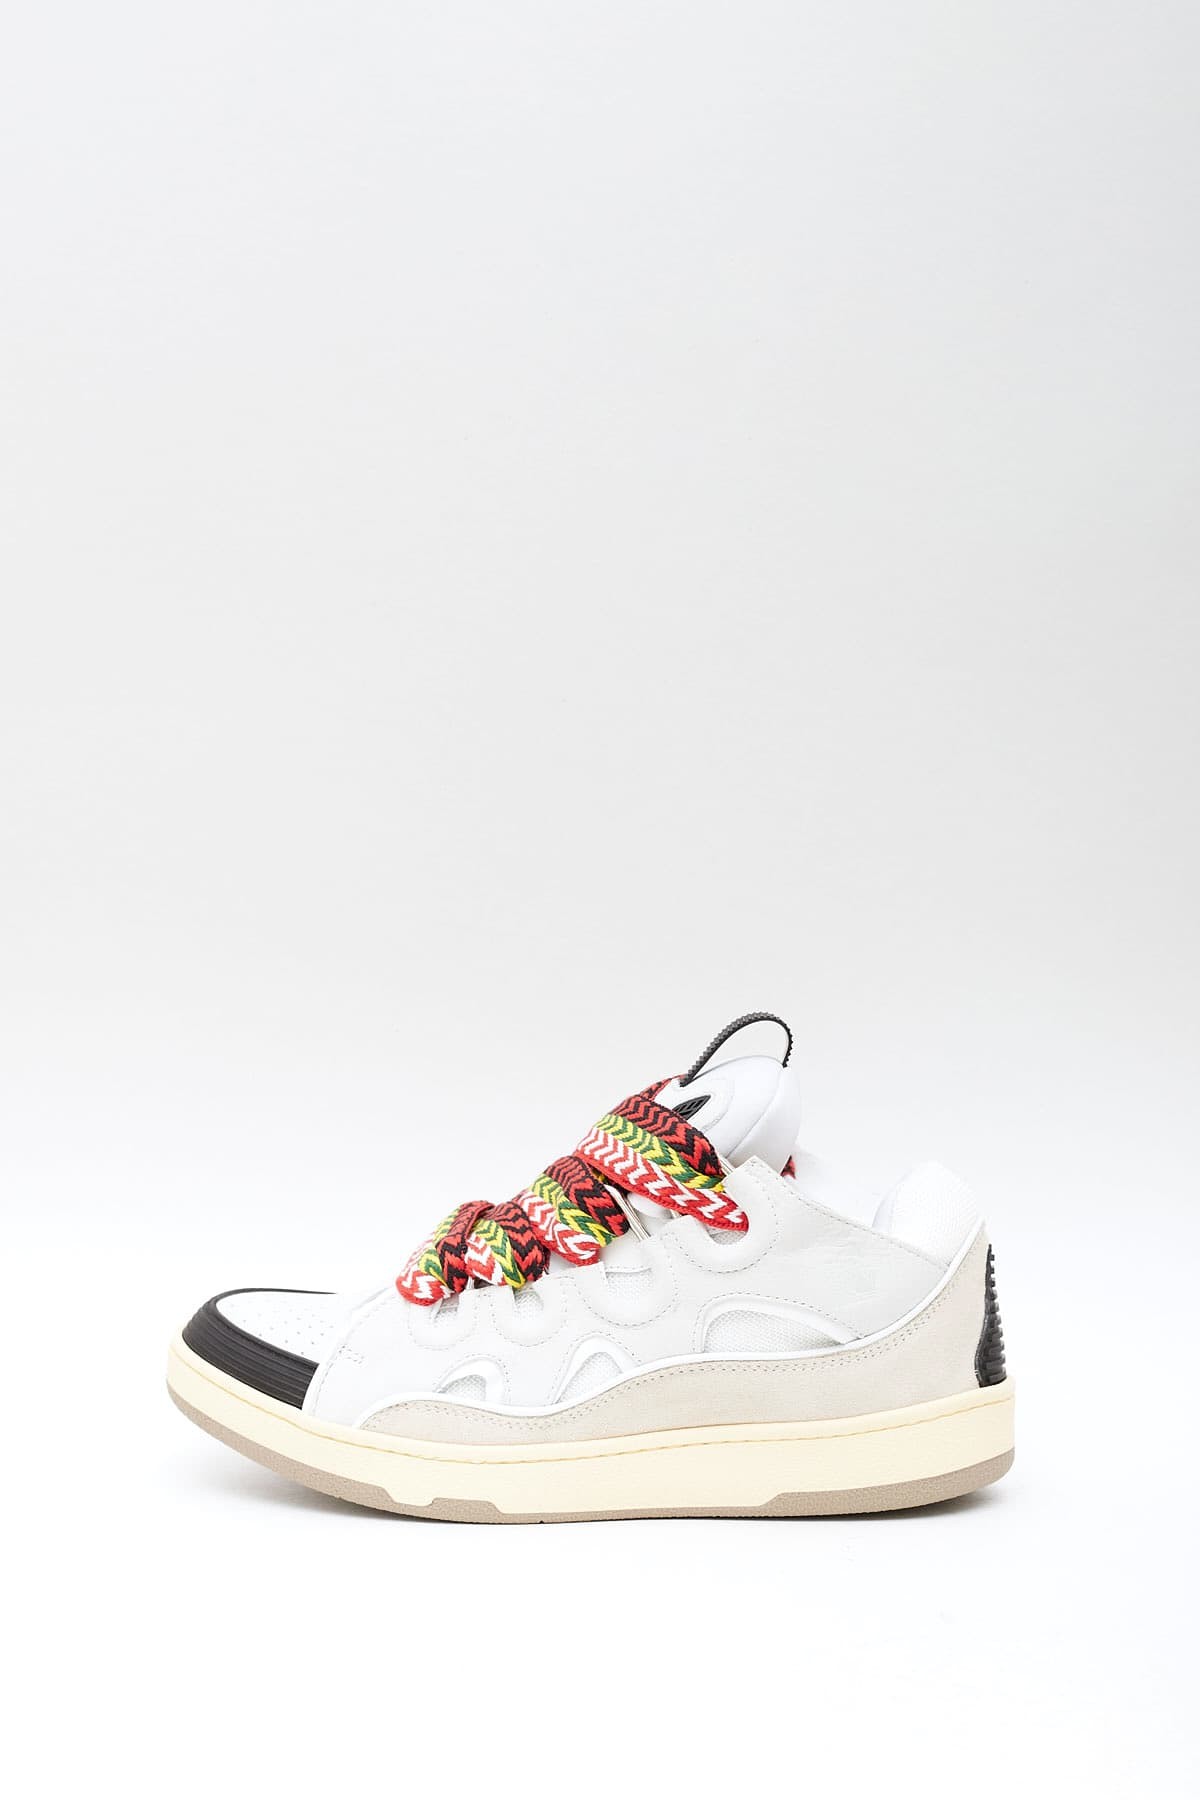 LANVIN WHITE LEATHER CURB SNEAKERS | IAMNUE